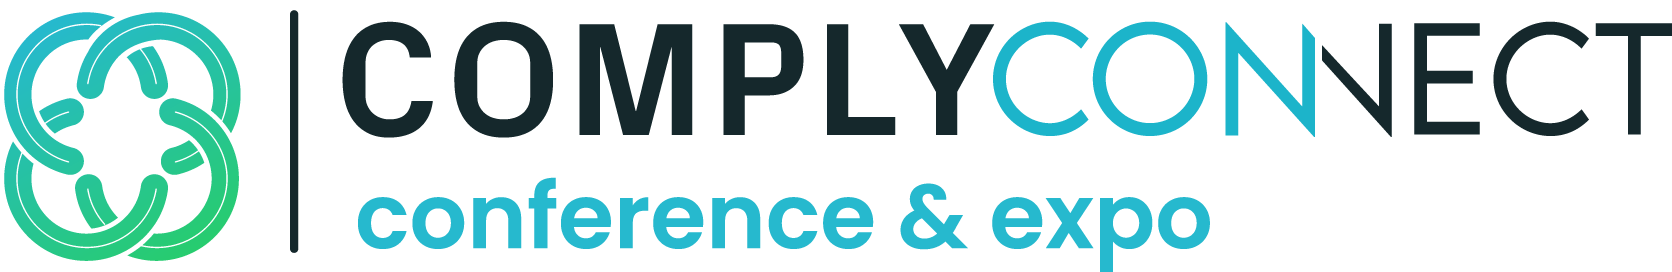 ComplyConnect Conference & Expo Logo